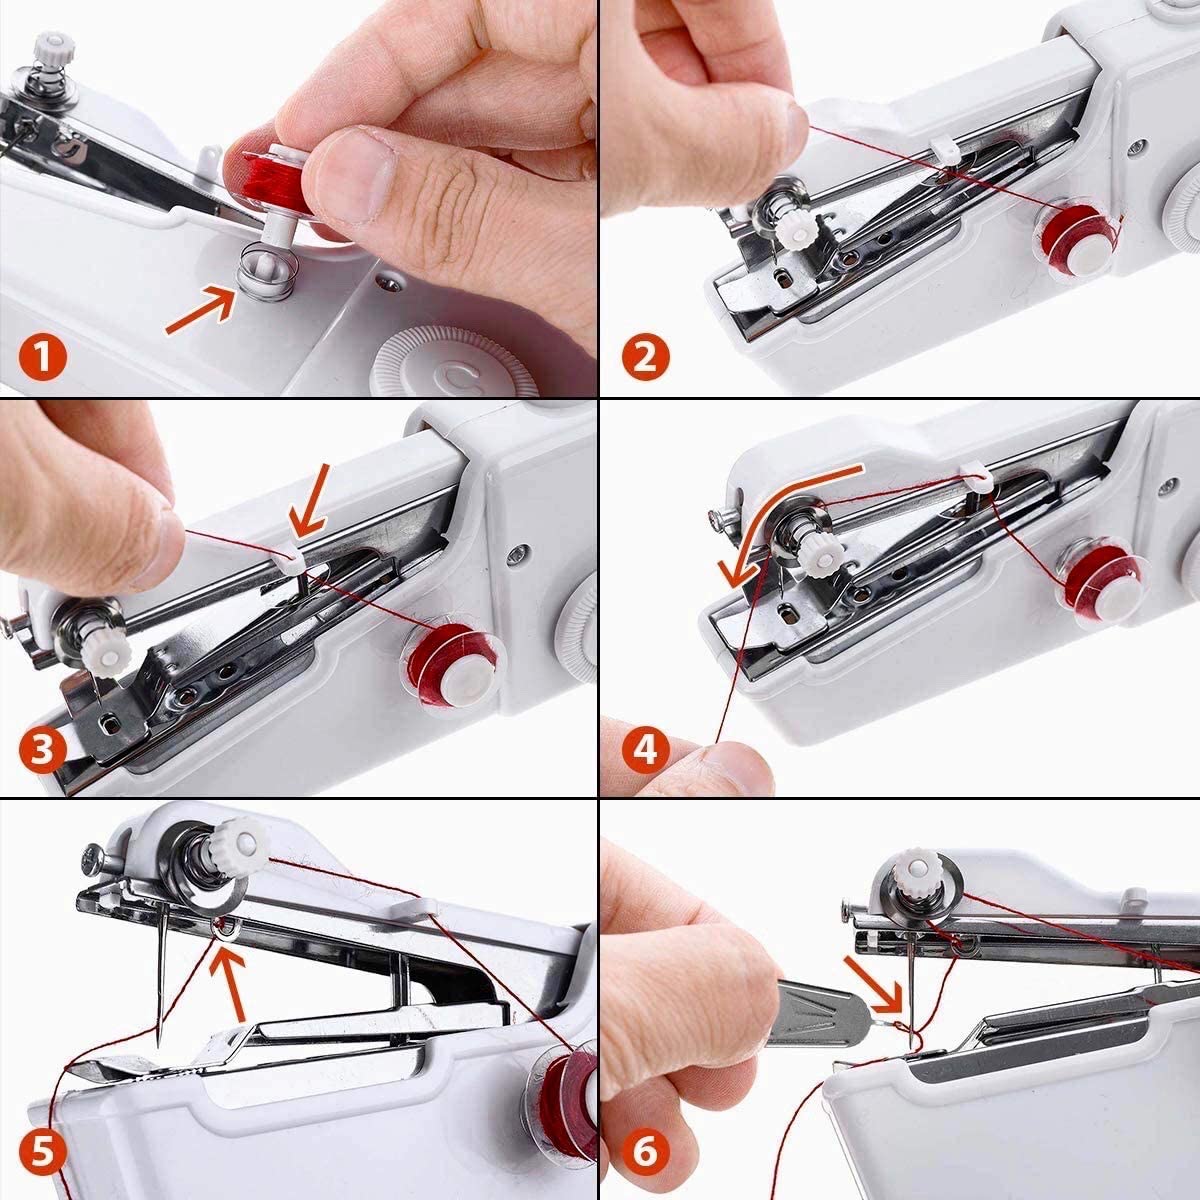 directions for using the singer handy stitch sewing machine